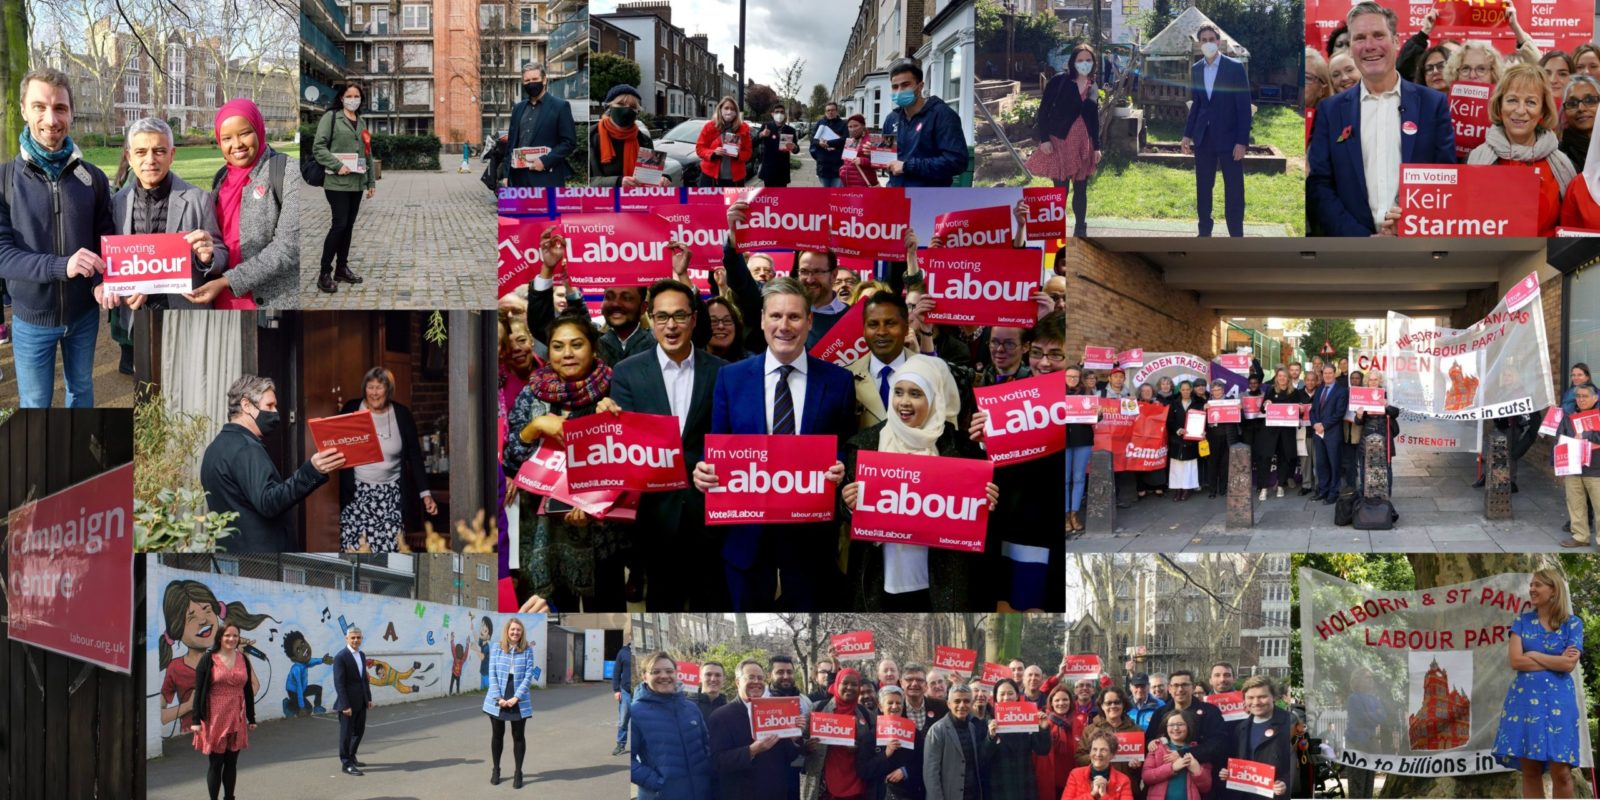 Holborn & St. Pancras Labour Party collage - COVID and pre-COVID